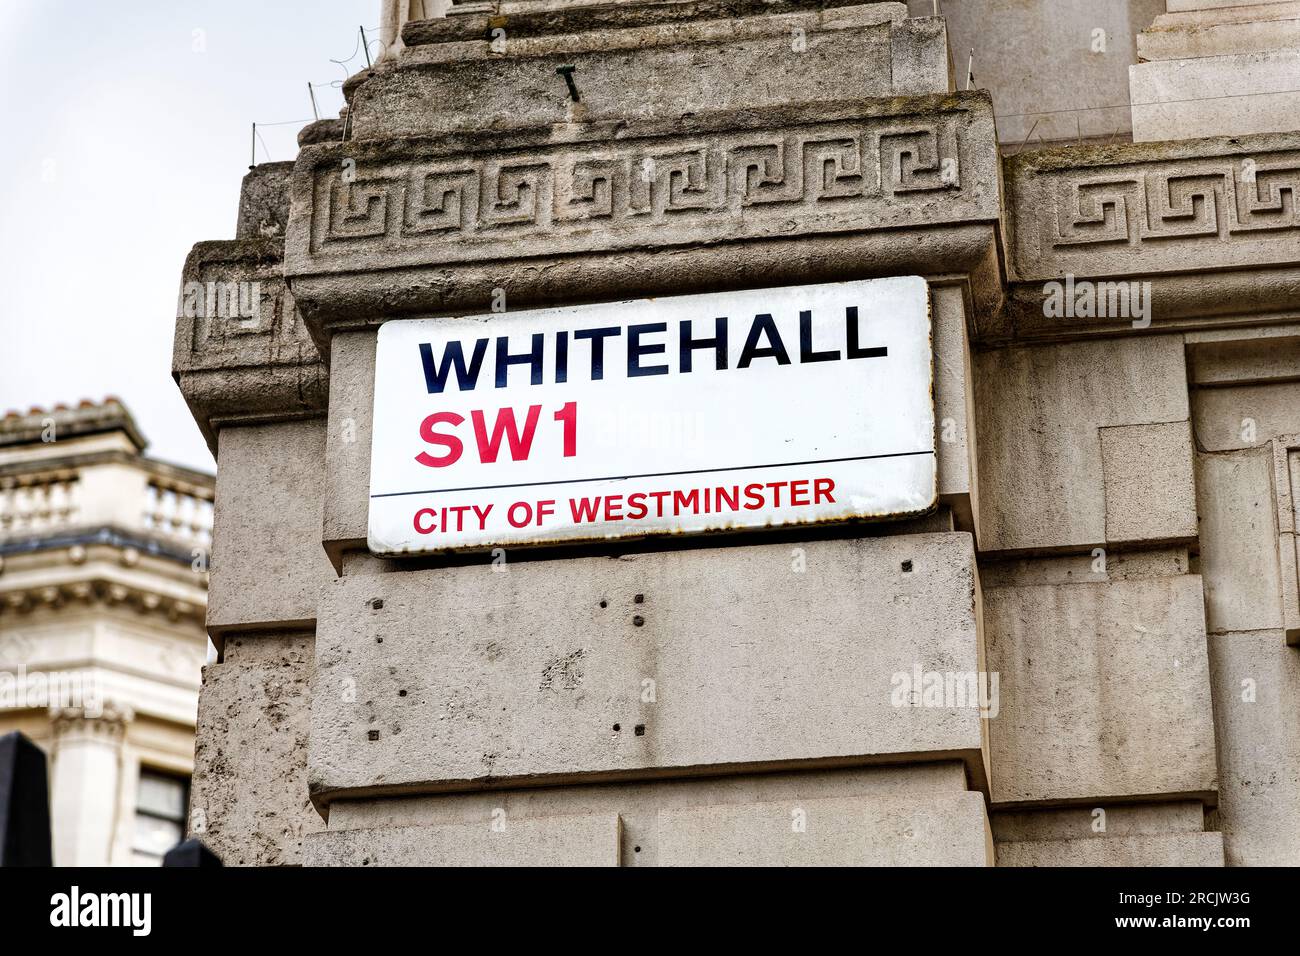 Downing Street and Whitehall, street sign, city of westminster, London,SW1, England, UK Stock Photo